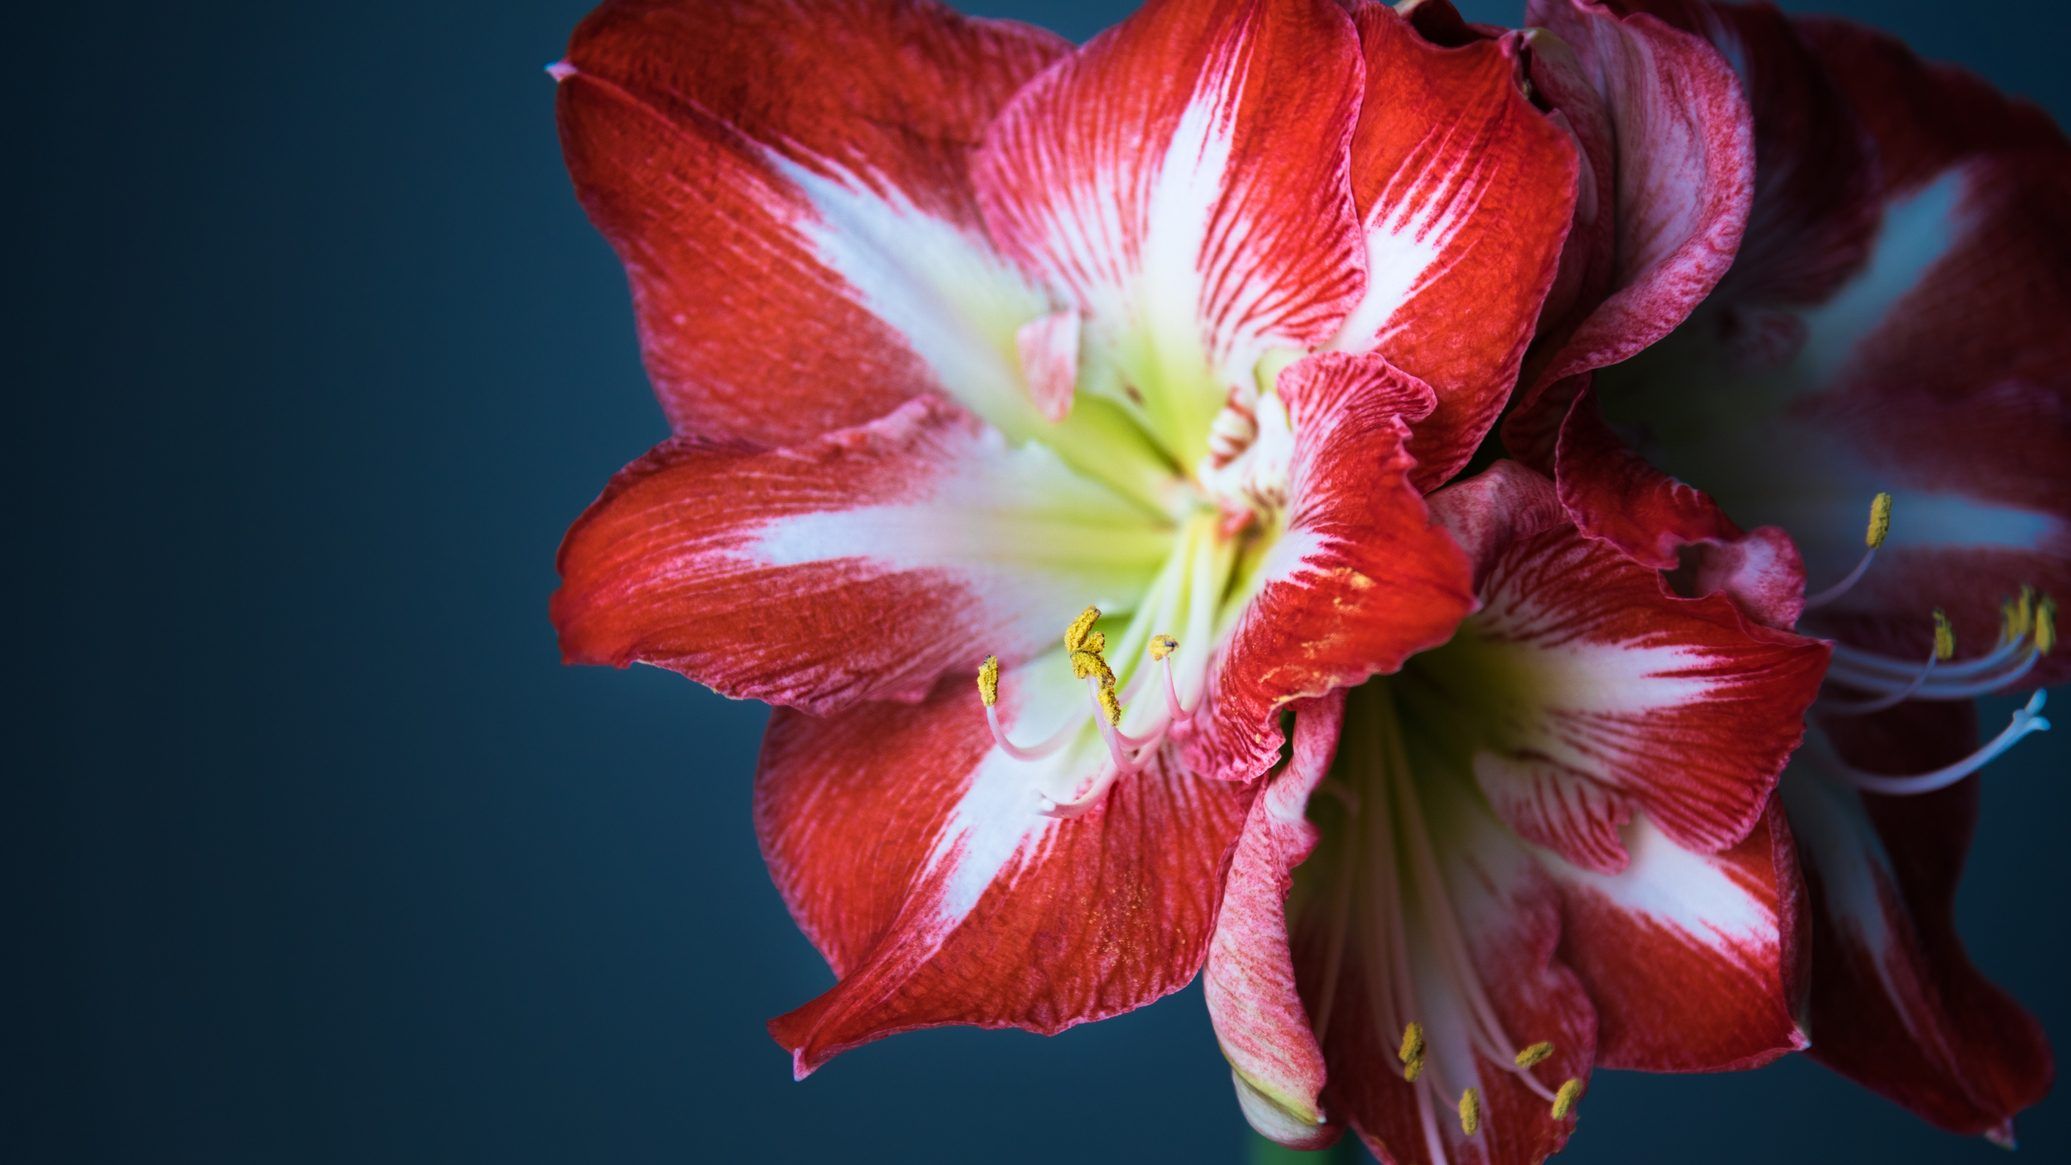 The Amaryllis is the signature flower of the Huntington Society of Canada.